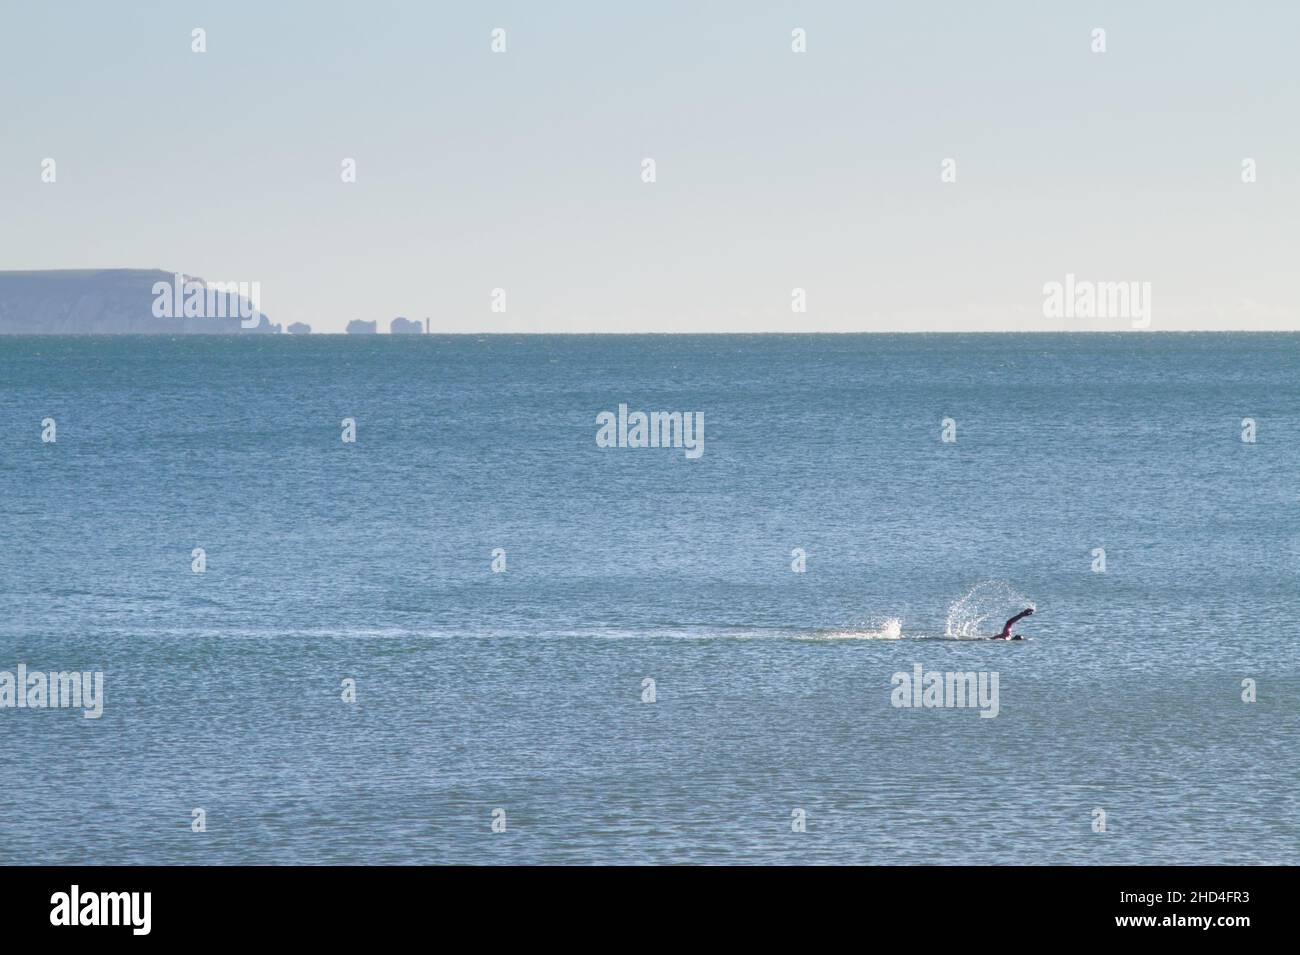 Wild Swimmer Swimming In The Sea In Winter Off Avon Beach With A View Over The Solent Towards The Isle Of Wight And The Needles UK Stock Photo